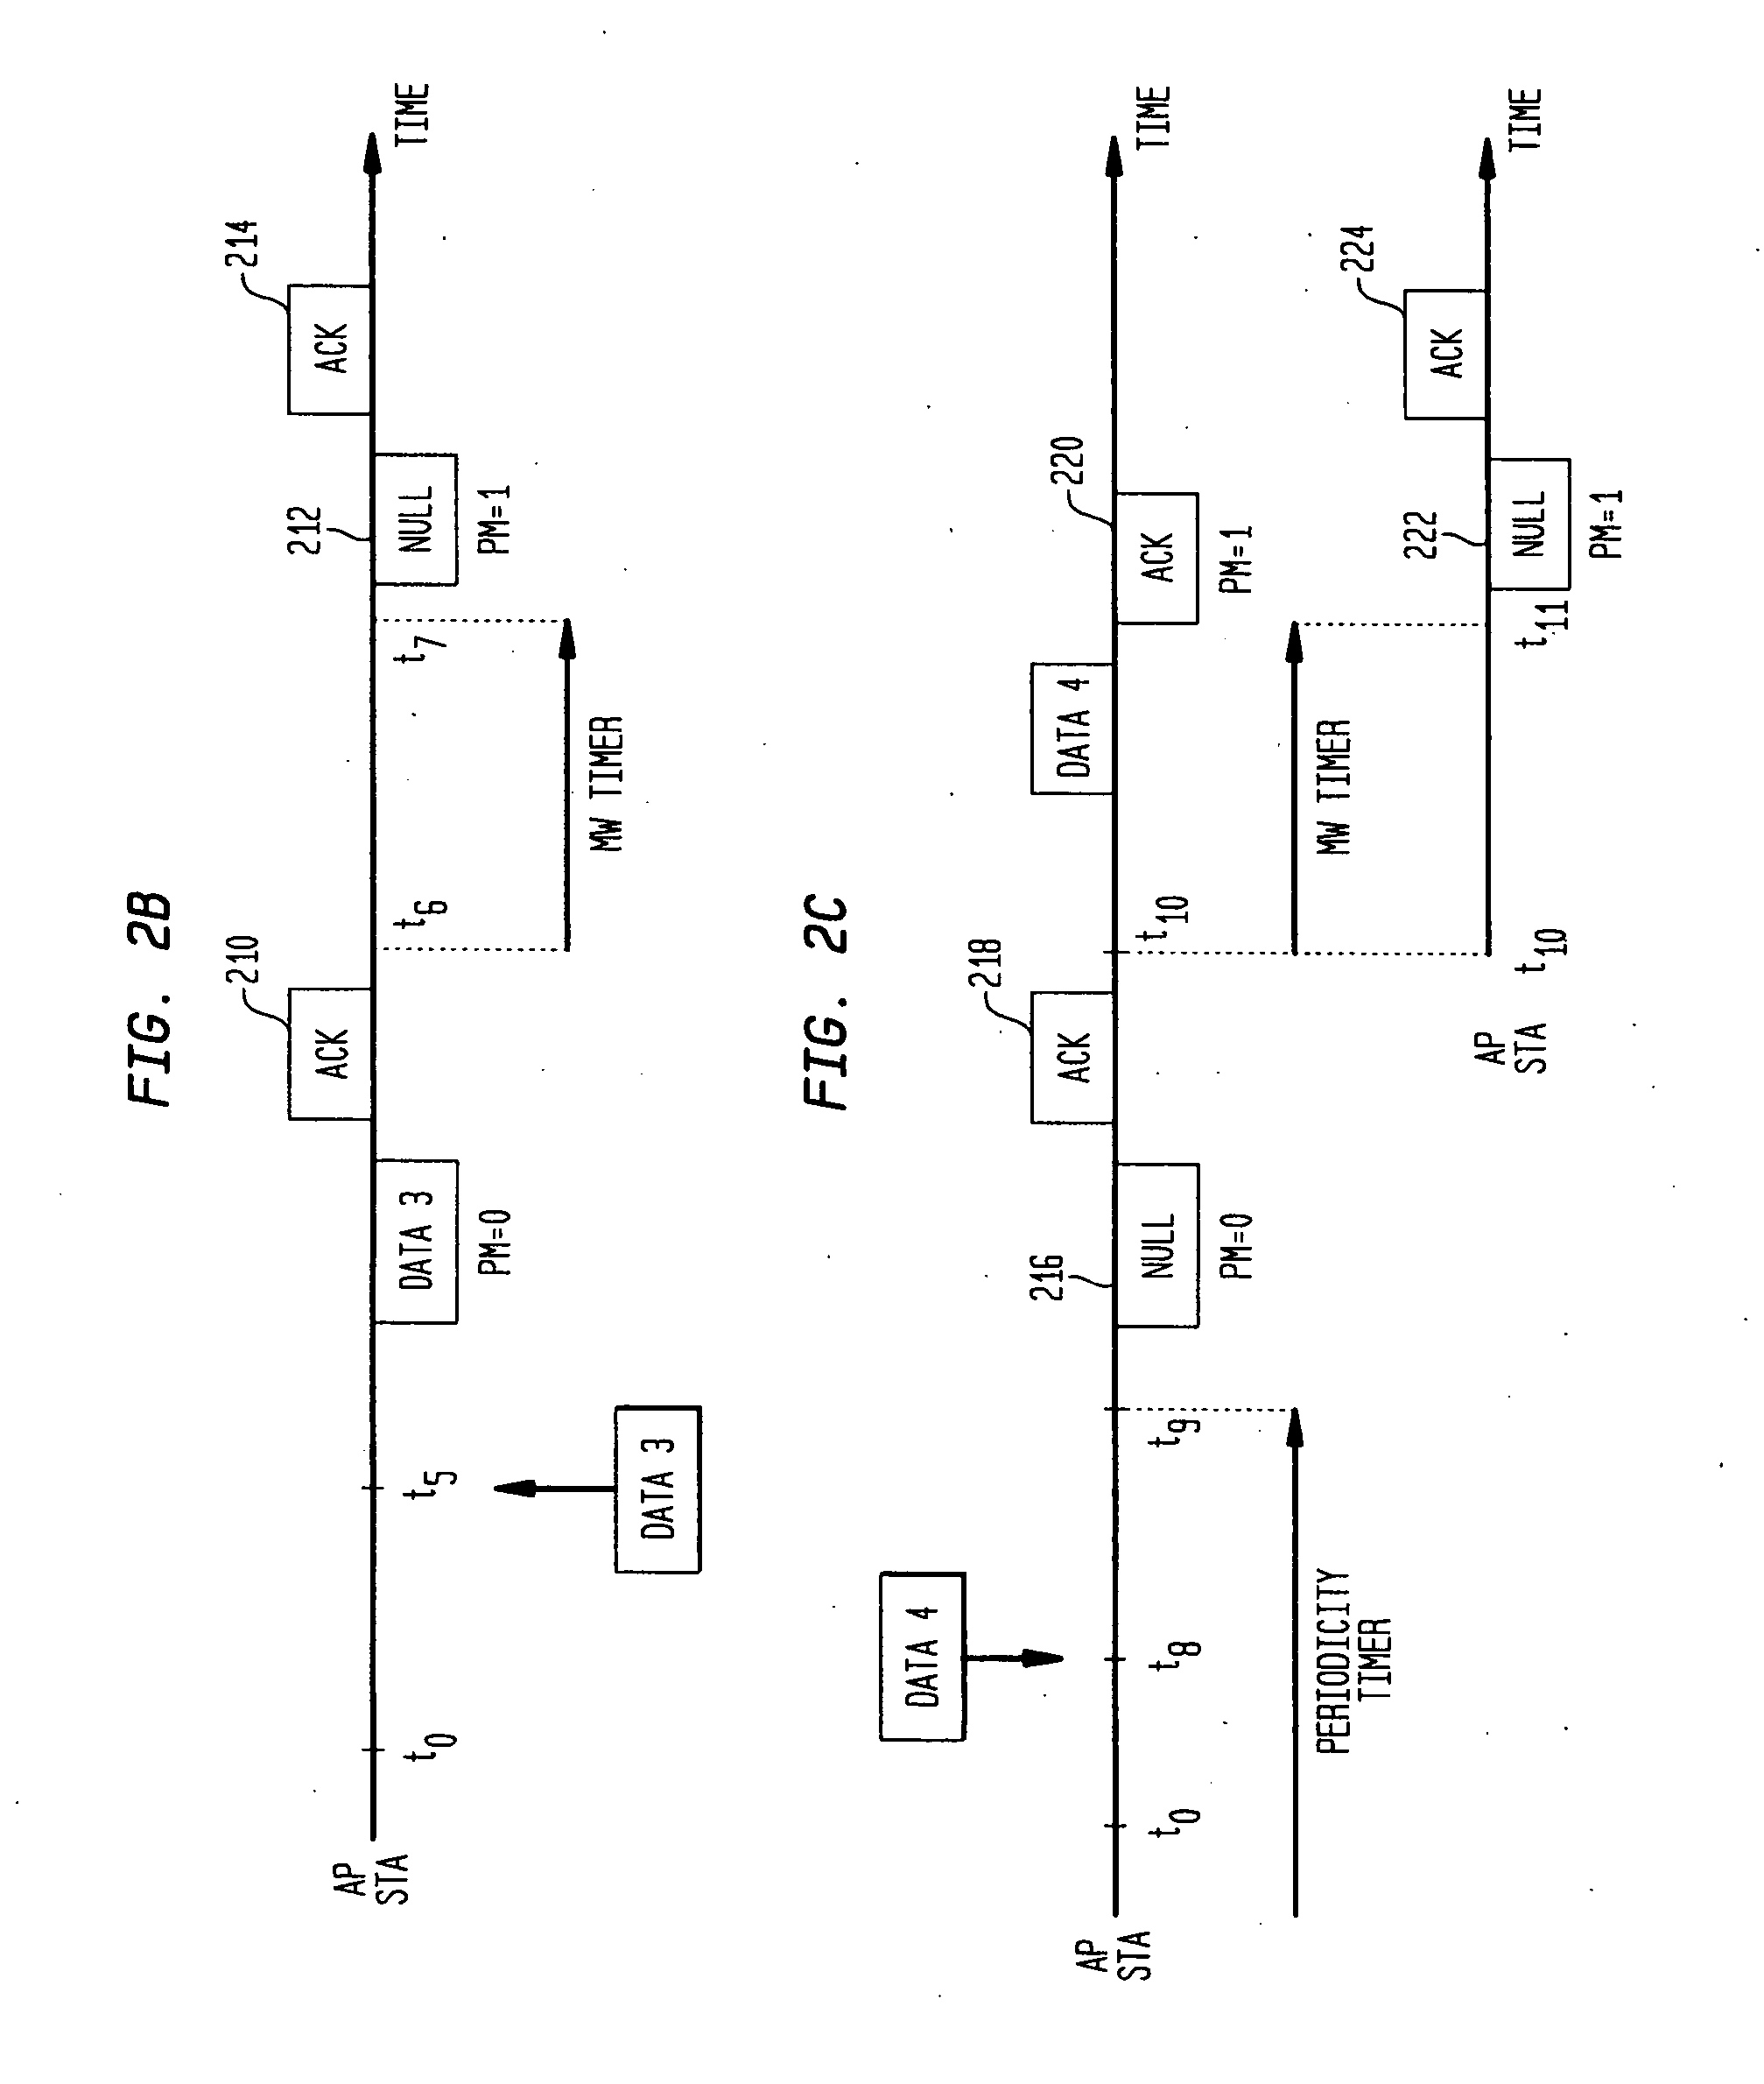 Power management method for managing deliver opportunities in a wireless communication system